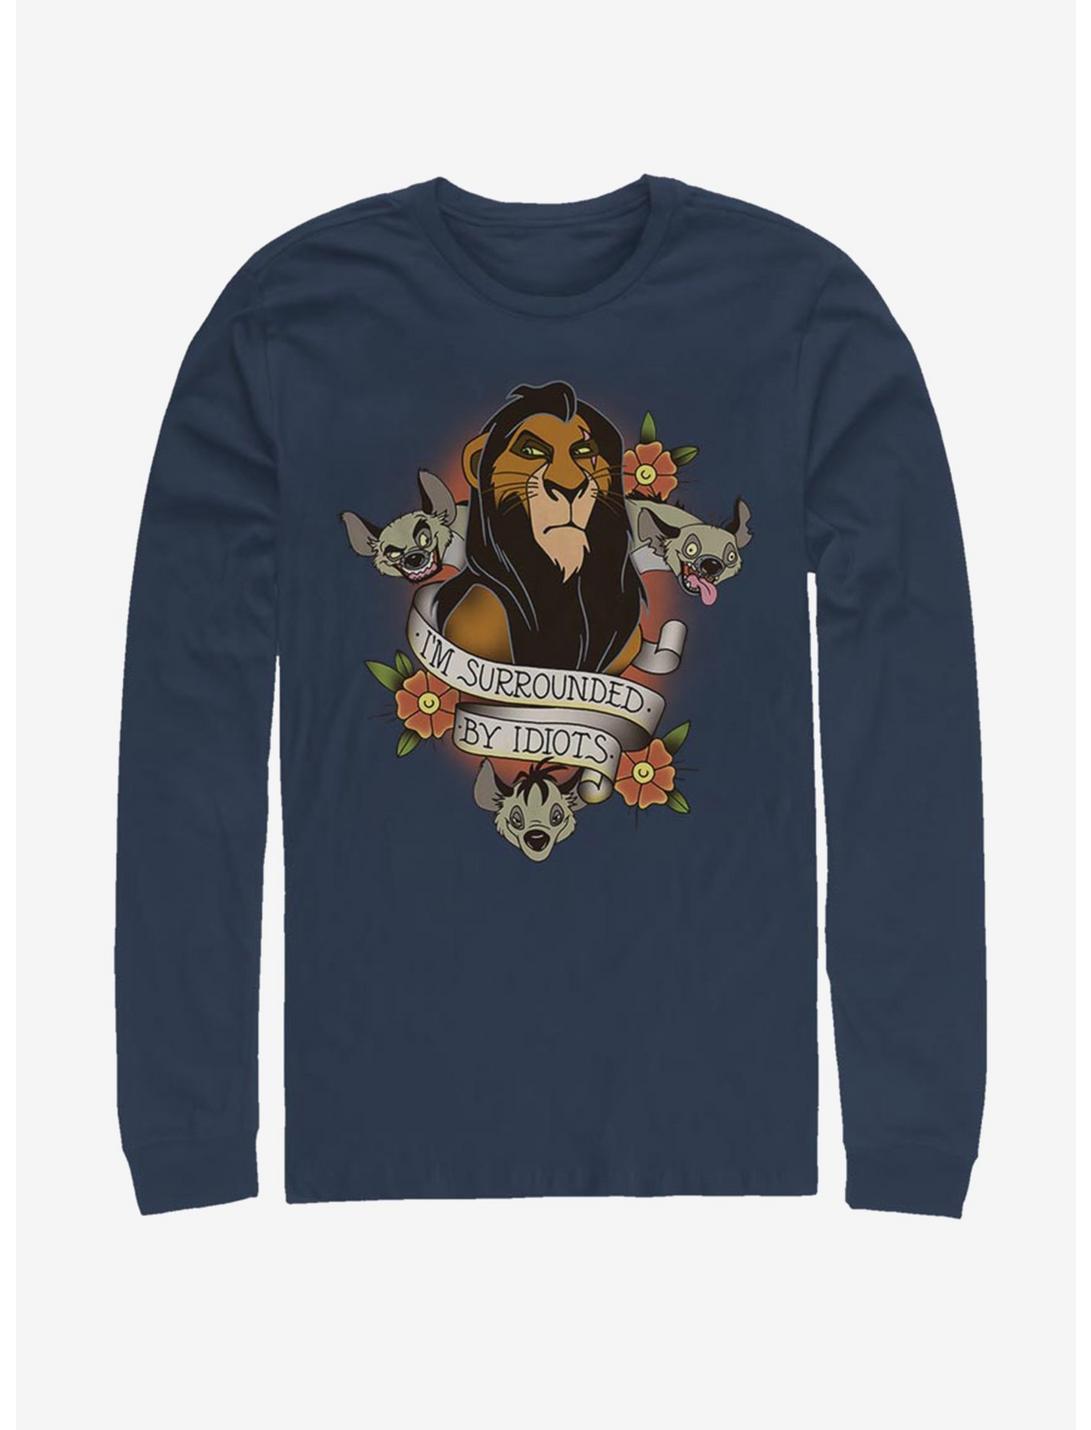 Disney The Lion King Surrounded Long-Sleeve T-Shirt, NAVY, hi-res